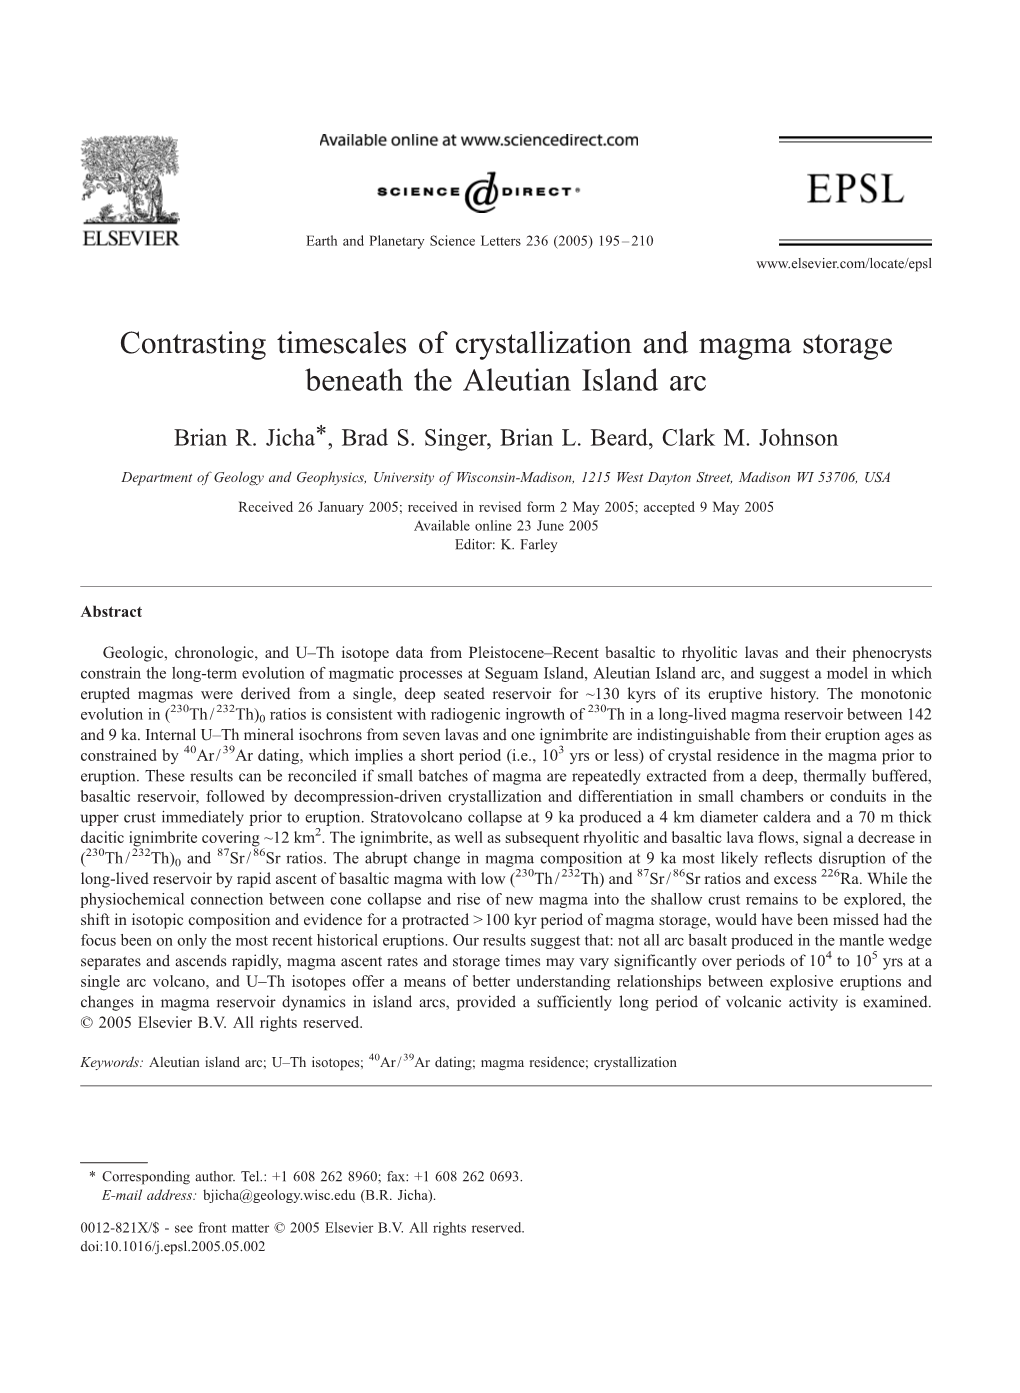 Contrasting Timescales of Crystallization and Magma Storage Beneath the Aleutian Island Arc